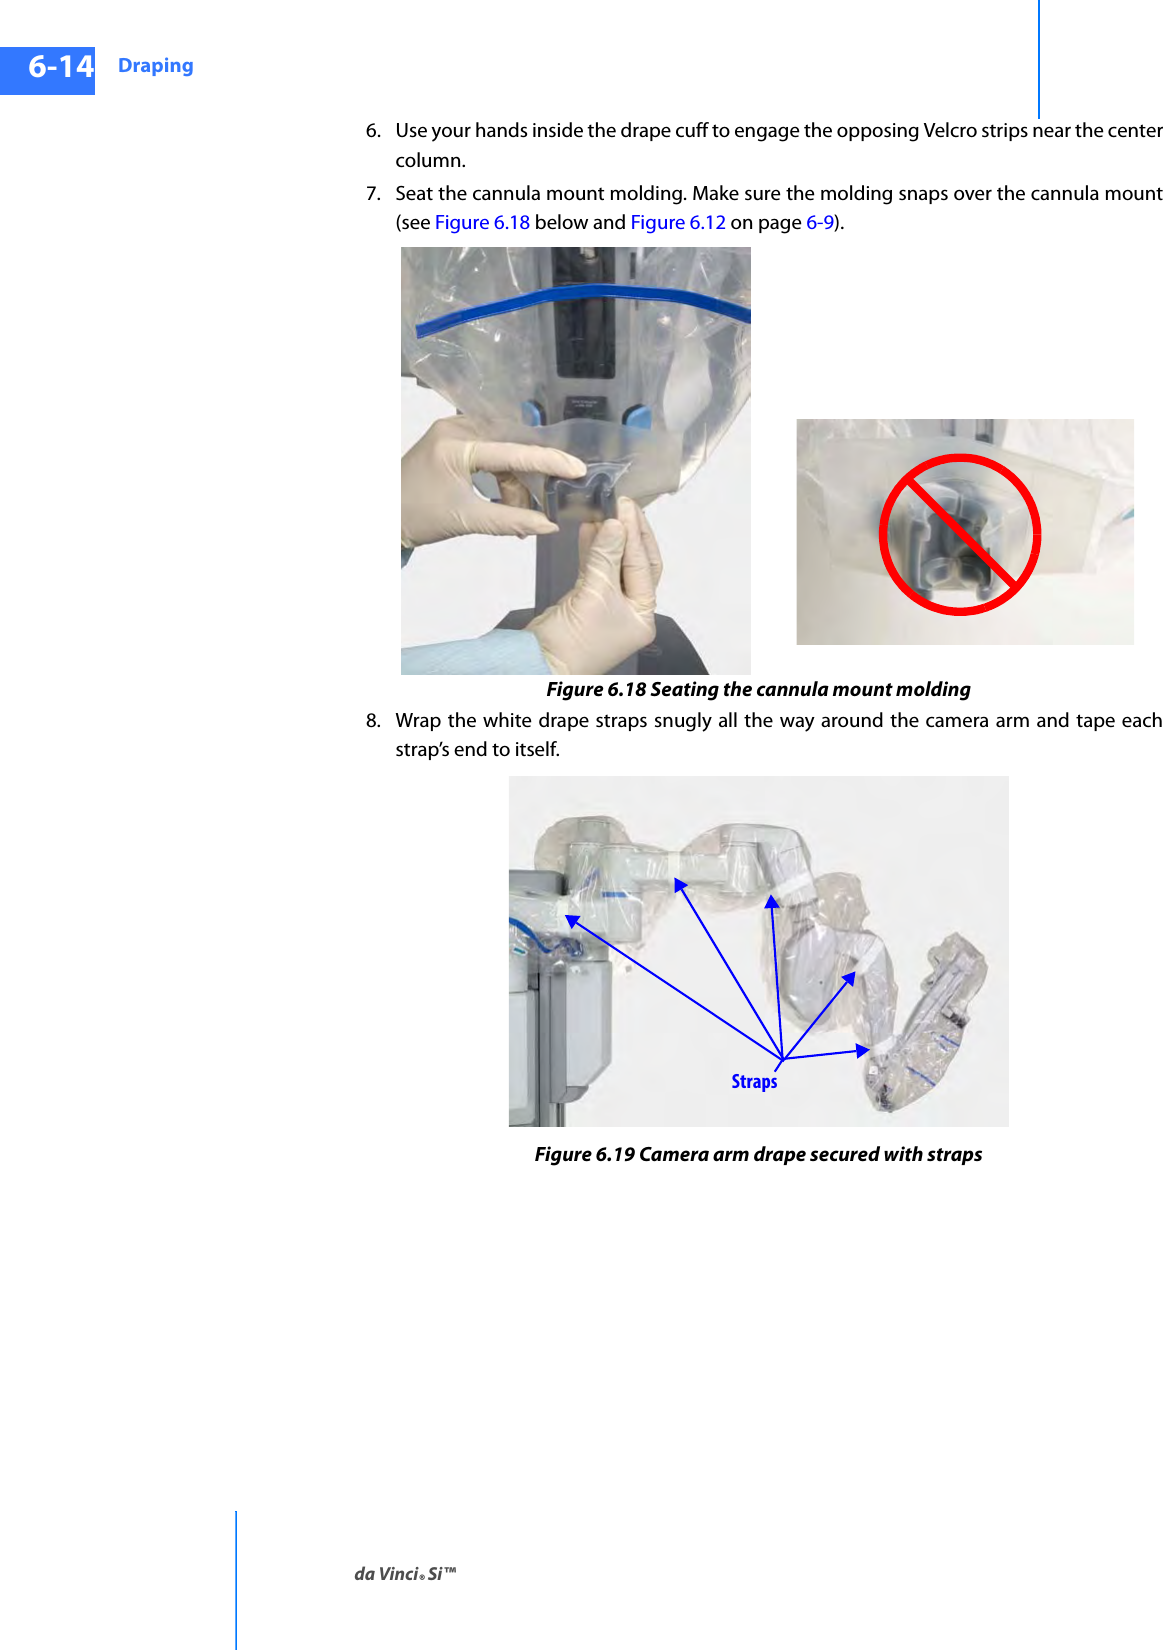 Drapingda Vinci® Si™6-14DRAFT/PRE-RELEASE/CONFIDENTIAL10/9/146. Use your hands inside the drape cuff to engage the opposing Velcro strips near the center column.7. Seat the cannula mount molding. Make sure the molding snaps over the cannula mount (see Figure 6.18 below and Figure 6.12 on page 6-9).Figure 6.18 Seating the cannula mount molding8. Wrap the white drape straps snugly all the way around the camera arm and tape each strap’s end to itself.Figure 6.19 Camera arm drape secured with strapsStraps